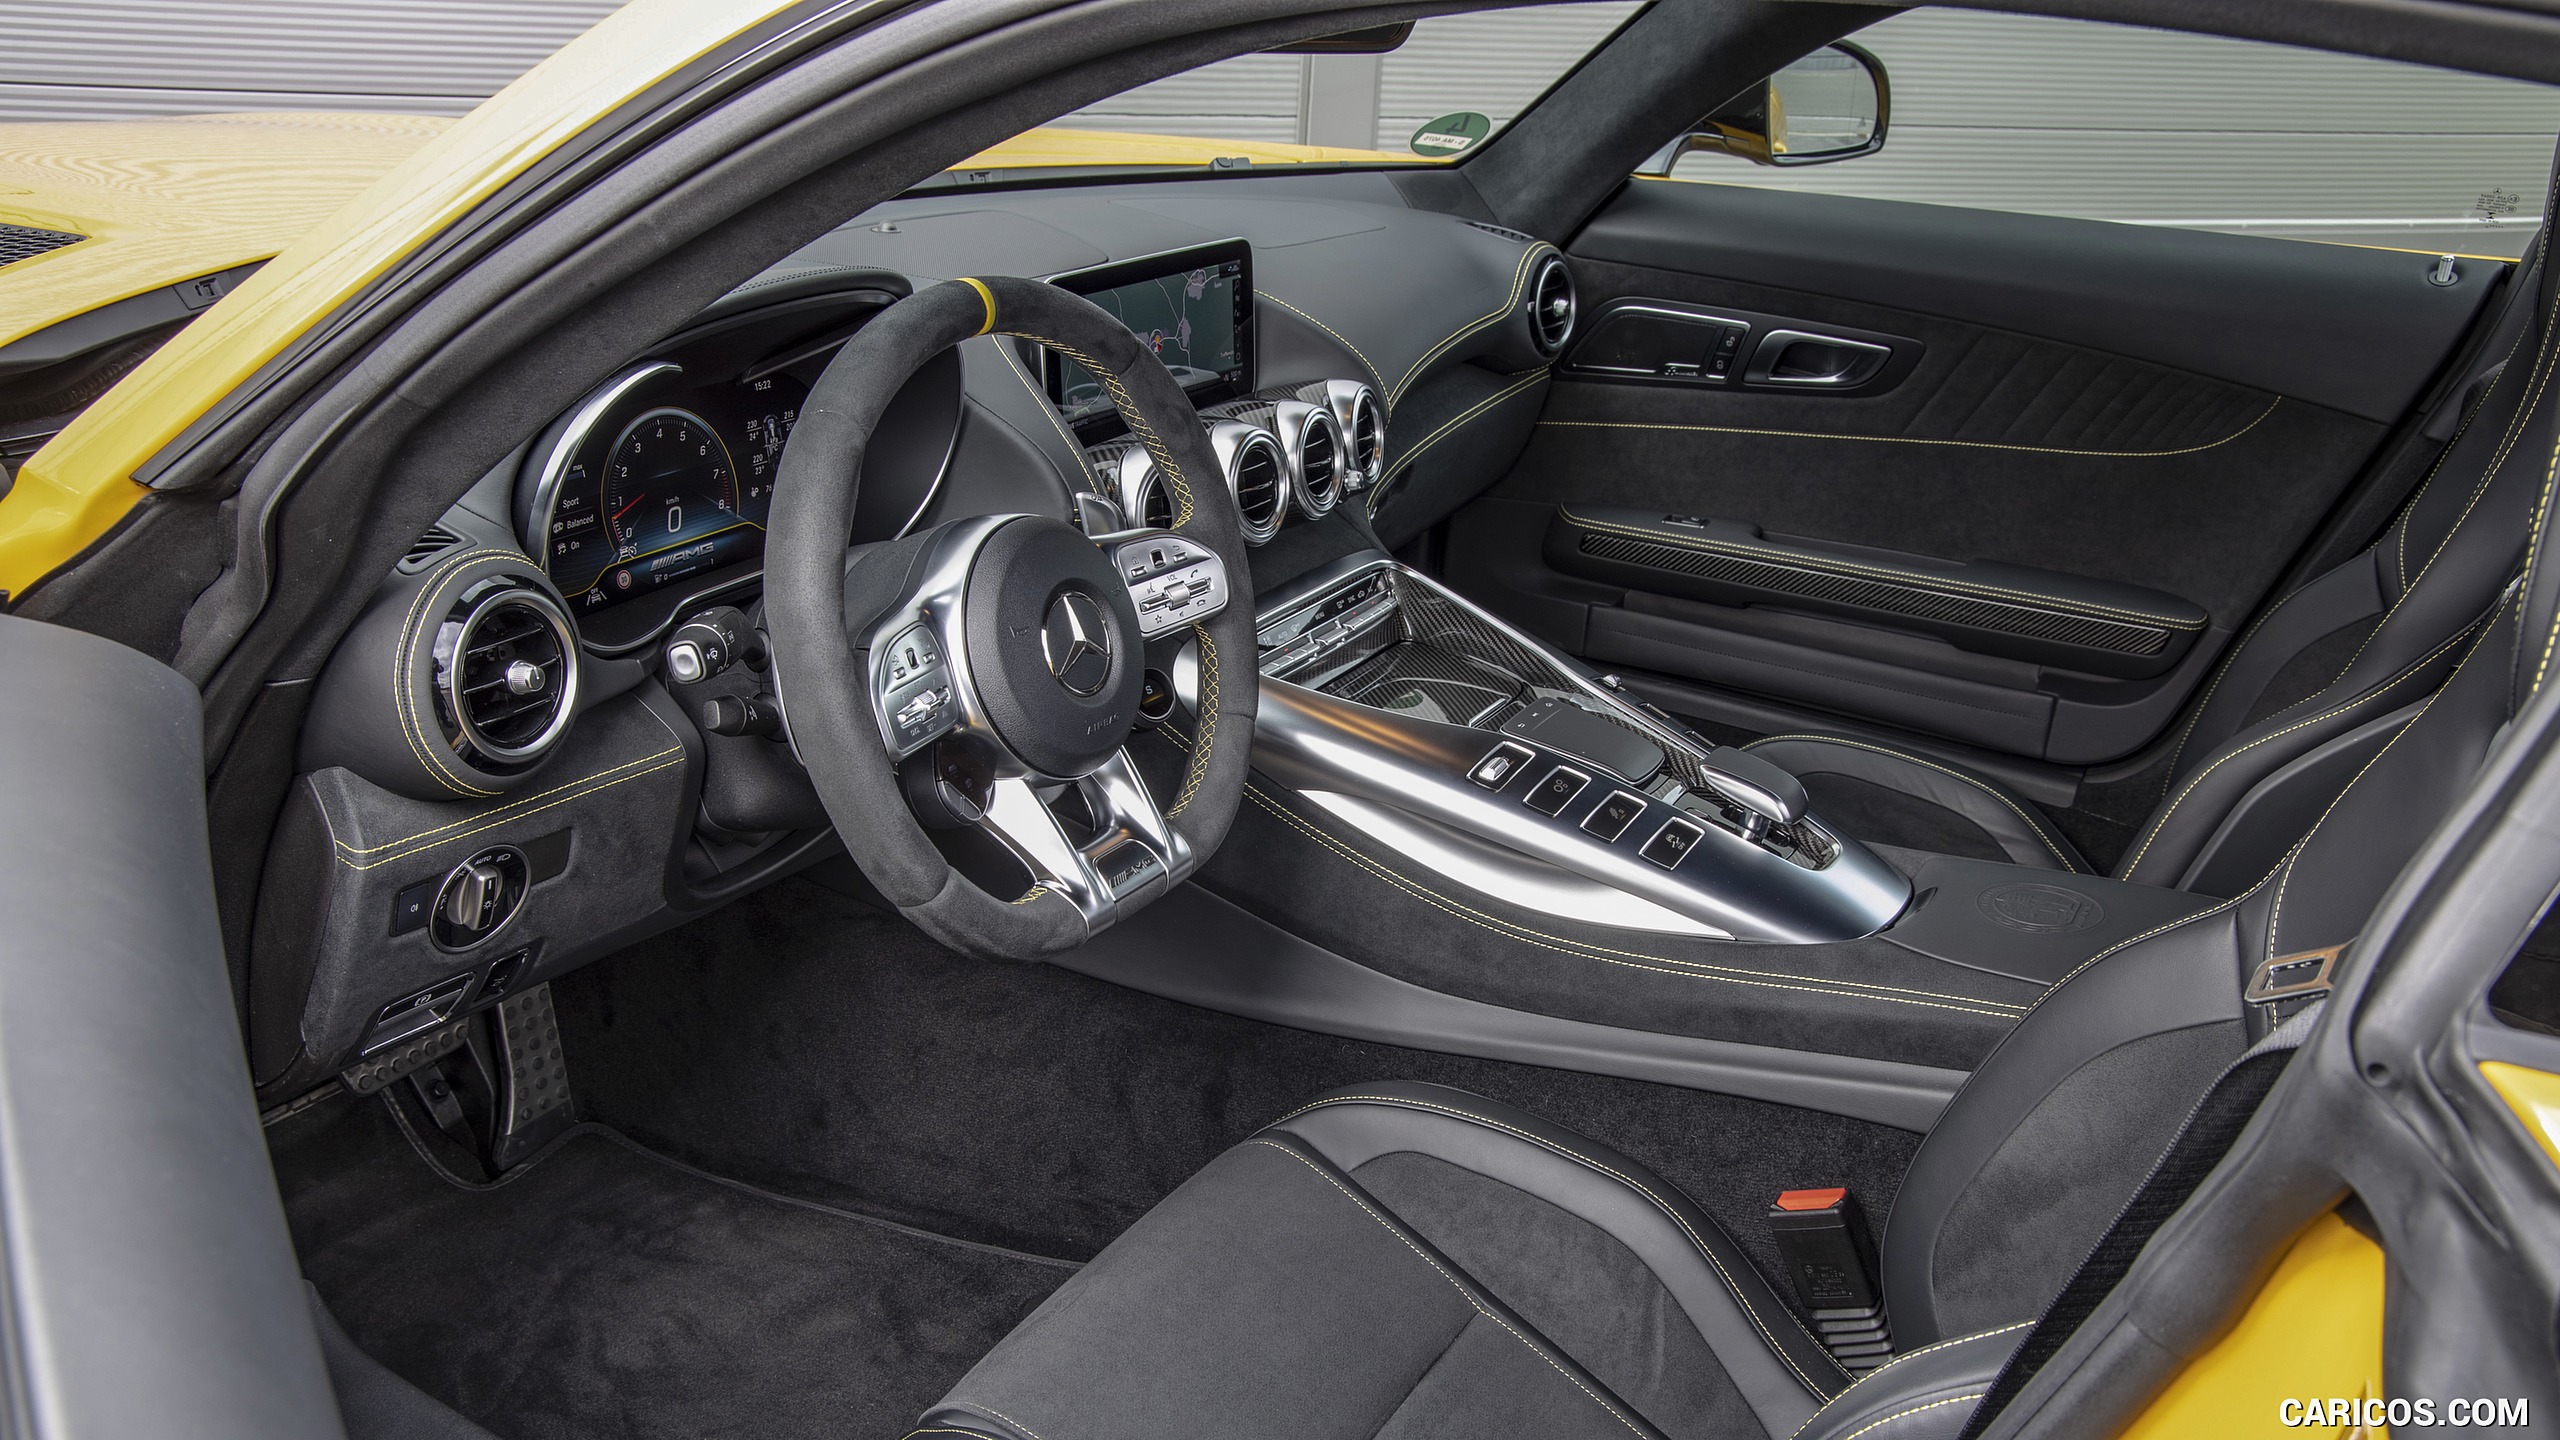 2020 Mercedes-AMG S Coupe - Interior, #86 of 328